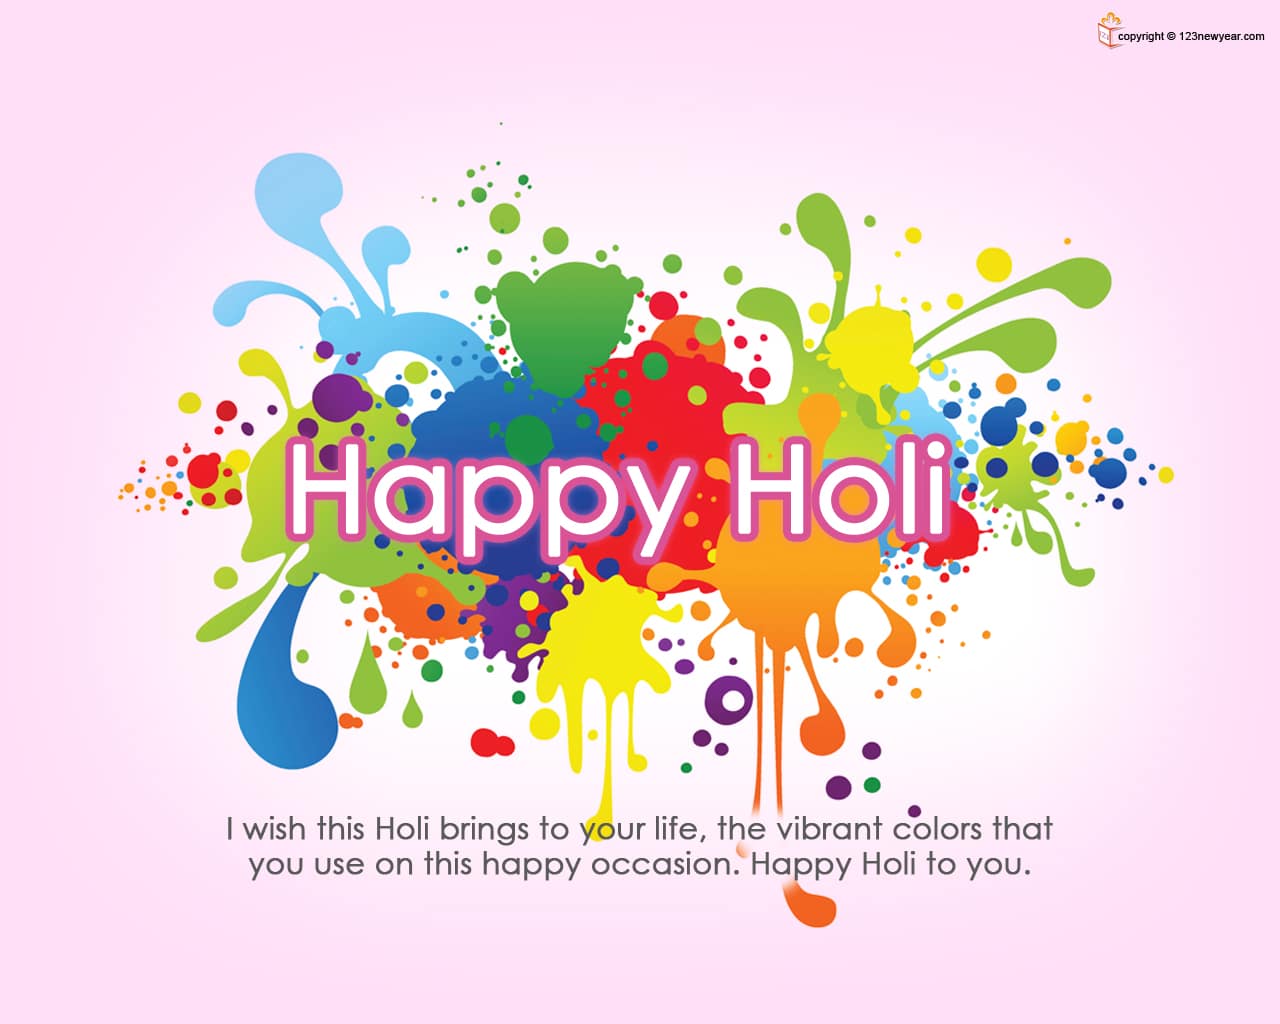 Happy Holi Images Photos And Wallpapers Hd - Happy Holi Wishes 2018 - HD Wallpaper 